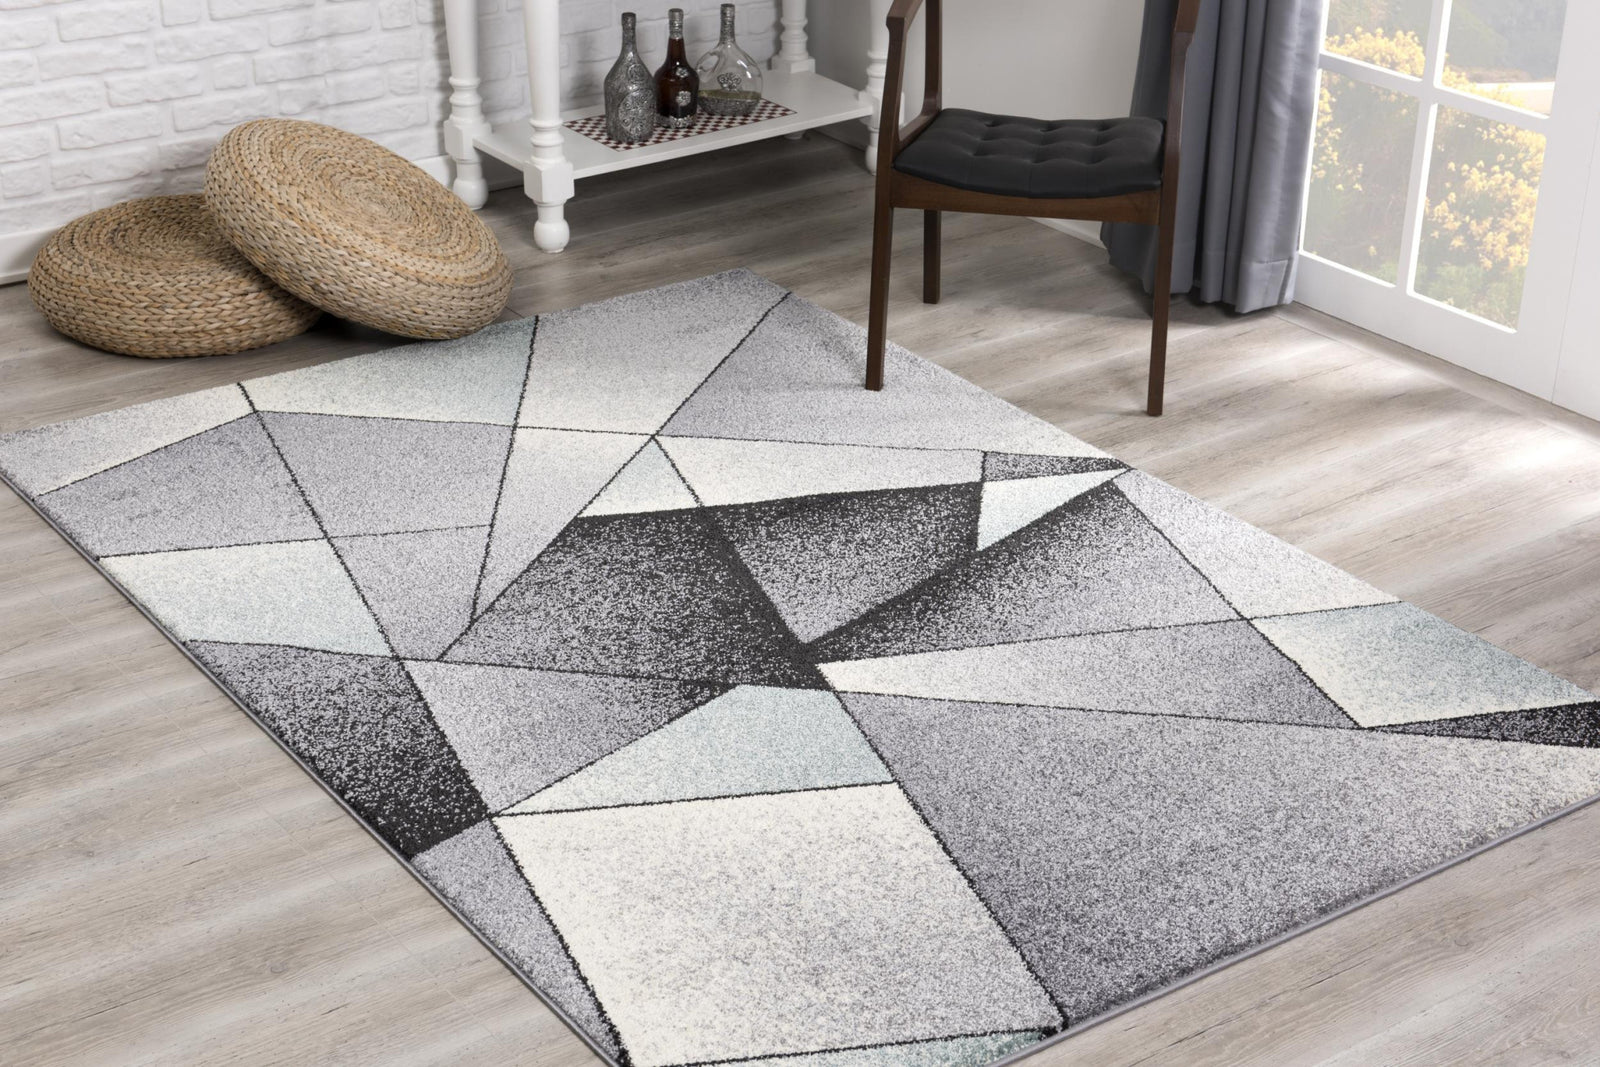 4’ X 6’ Gray And Blue Prism Pattern Area Rug